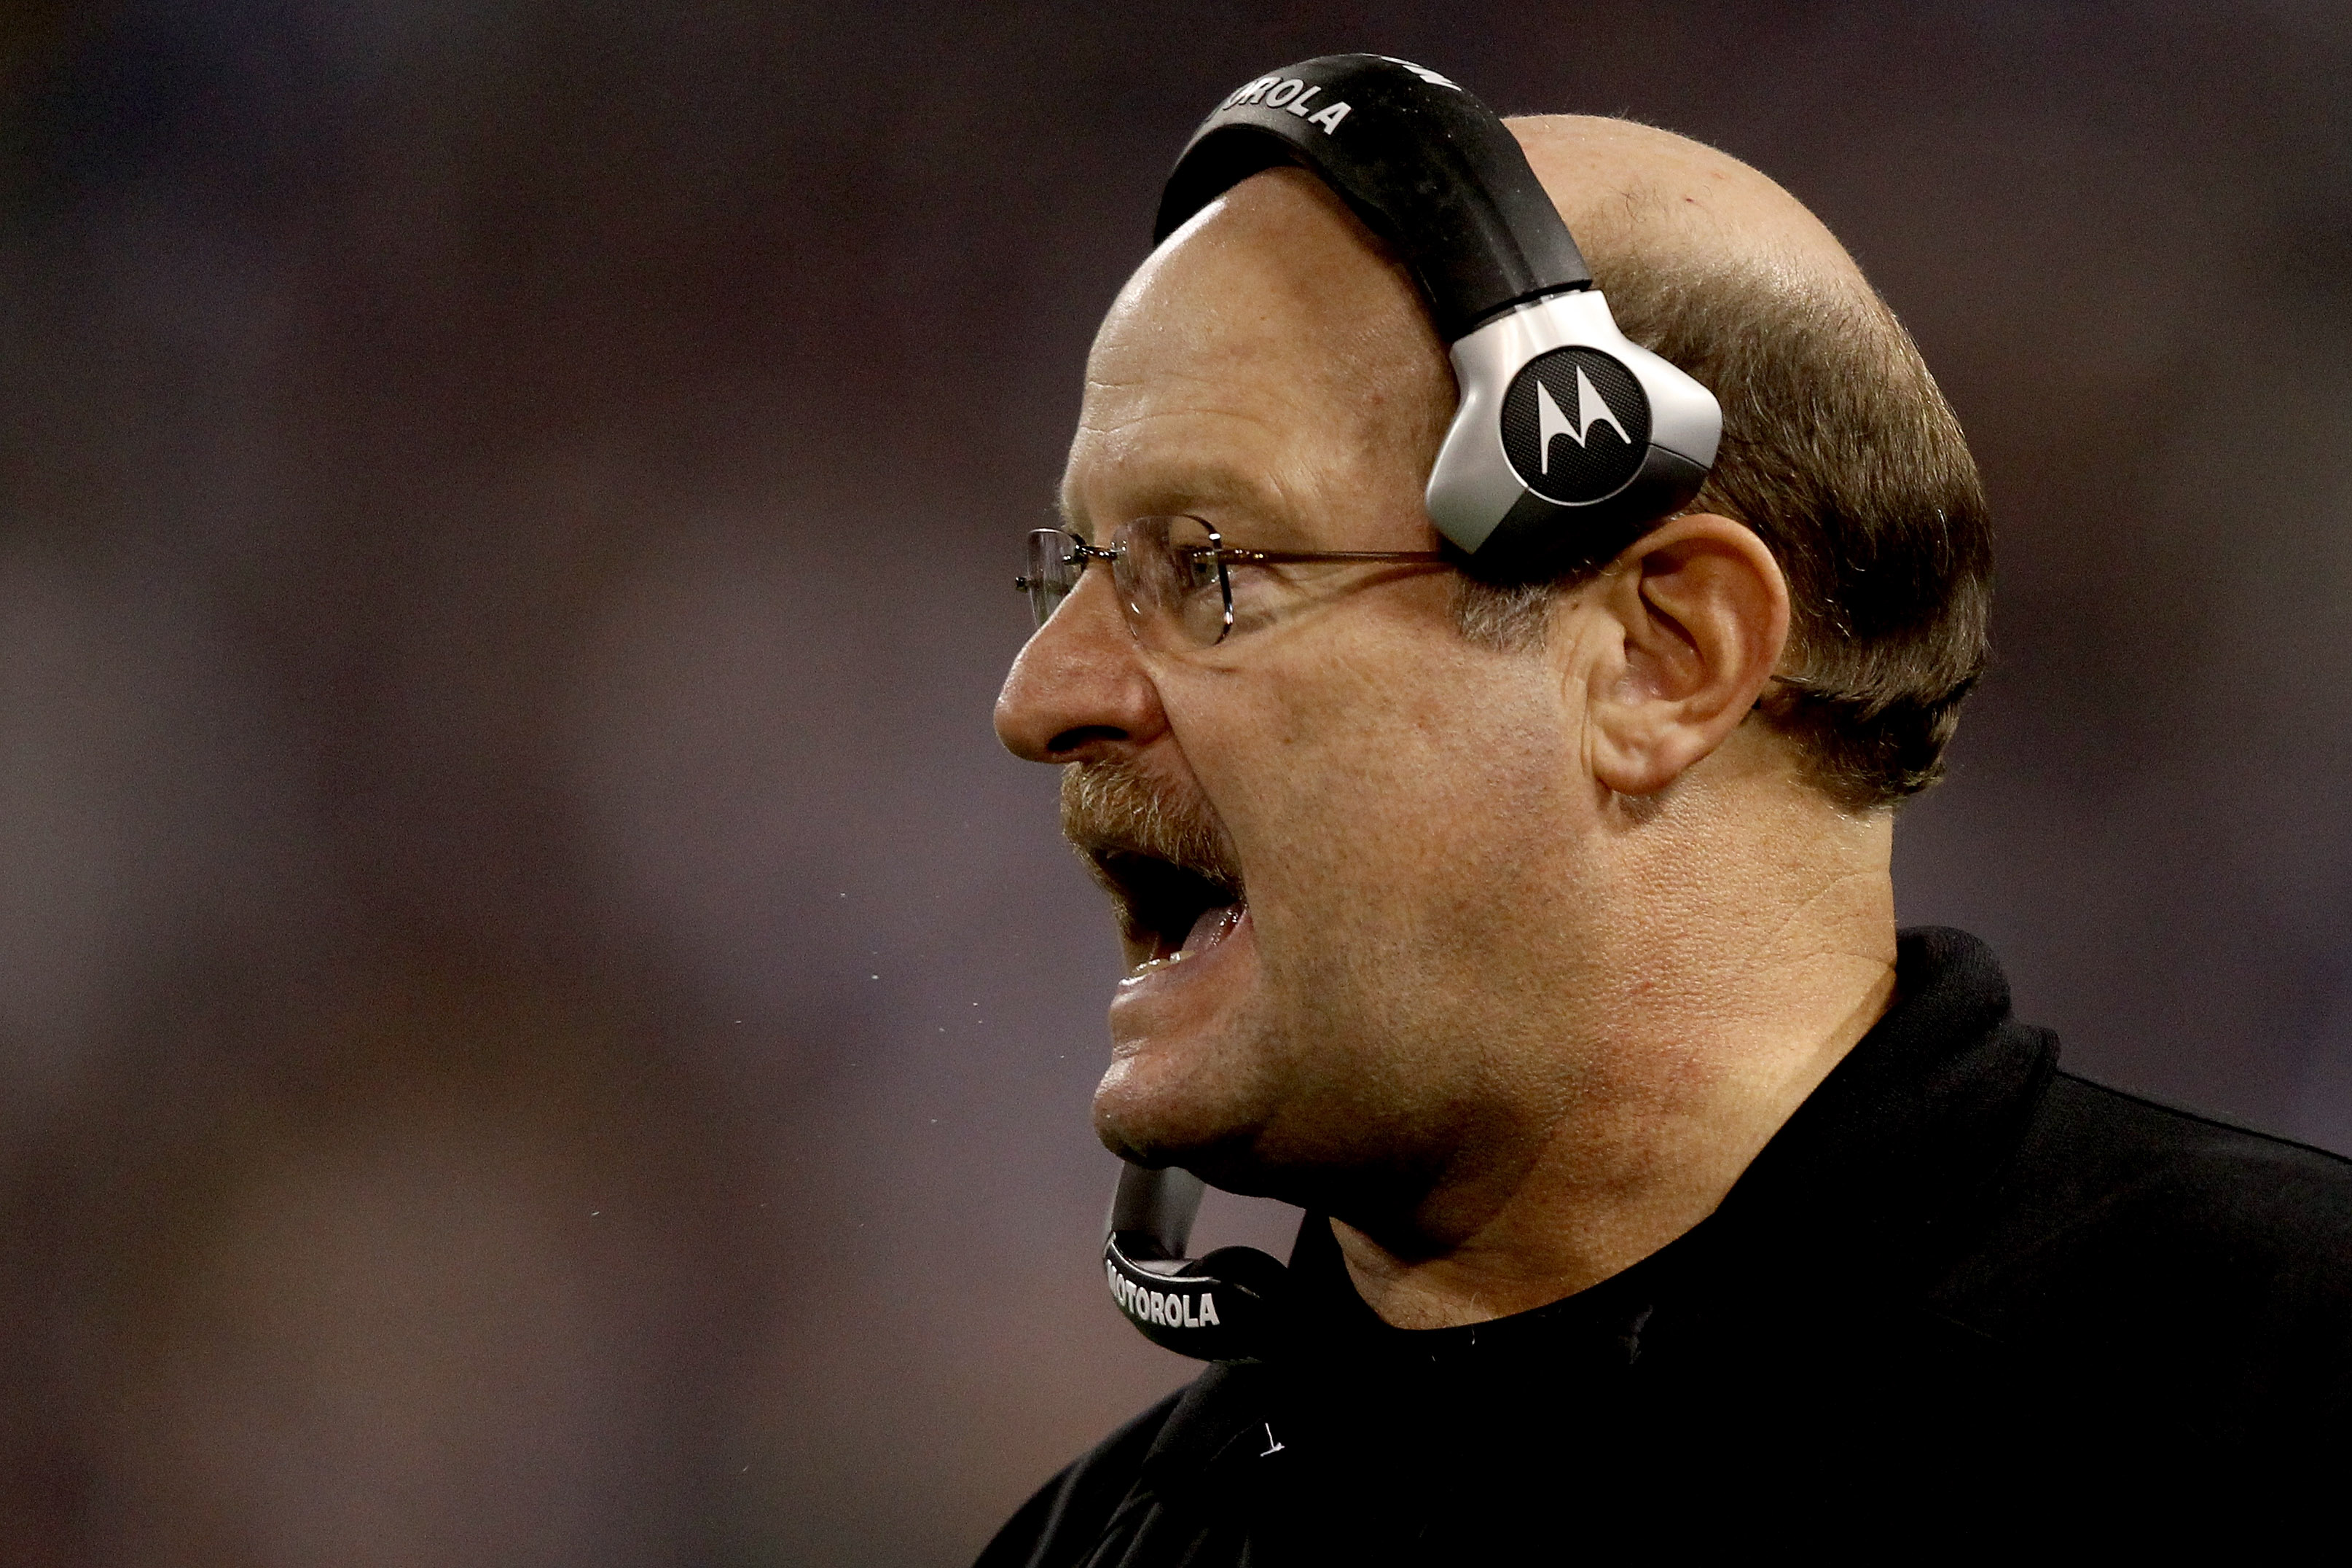 MINNEAPOLIS - NOVEMBER 21:  Head coach Brad Childress of the Minnesota Vikings on the sidelines against the Green Bay Packers at the Hubert H. Humphrey Metrodome on November 21, 2010 in Minneapolis, Minnesota.  (Photo by Matthew Stockman/Getty Images)